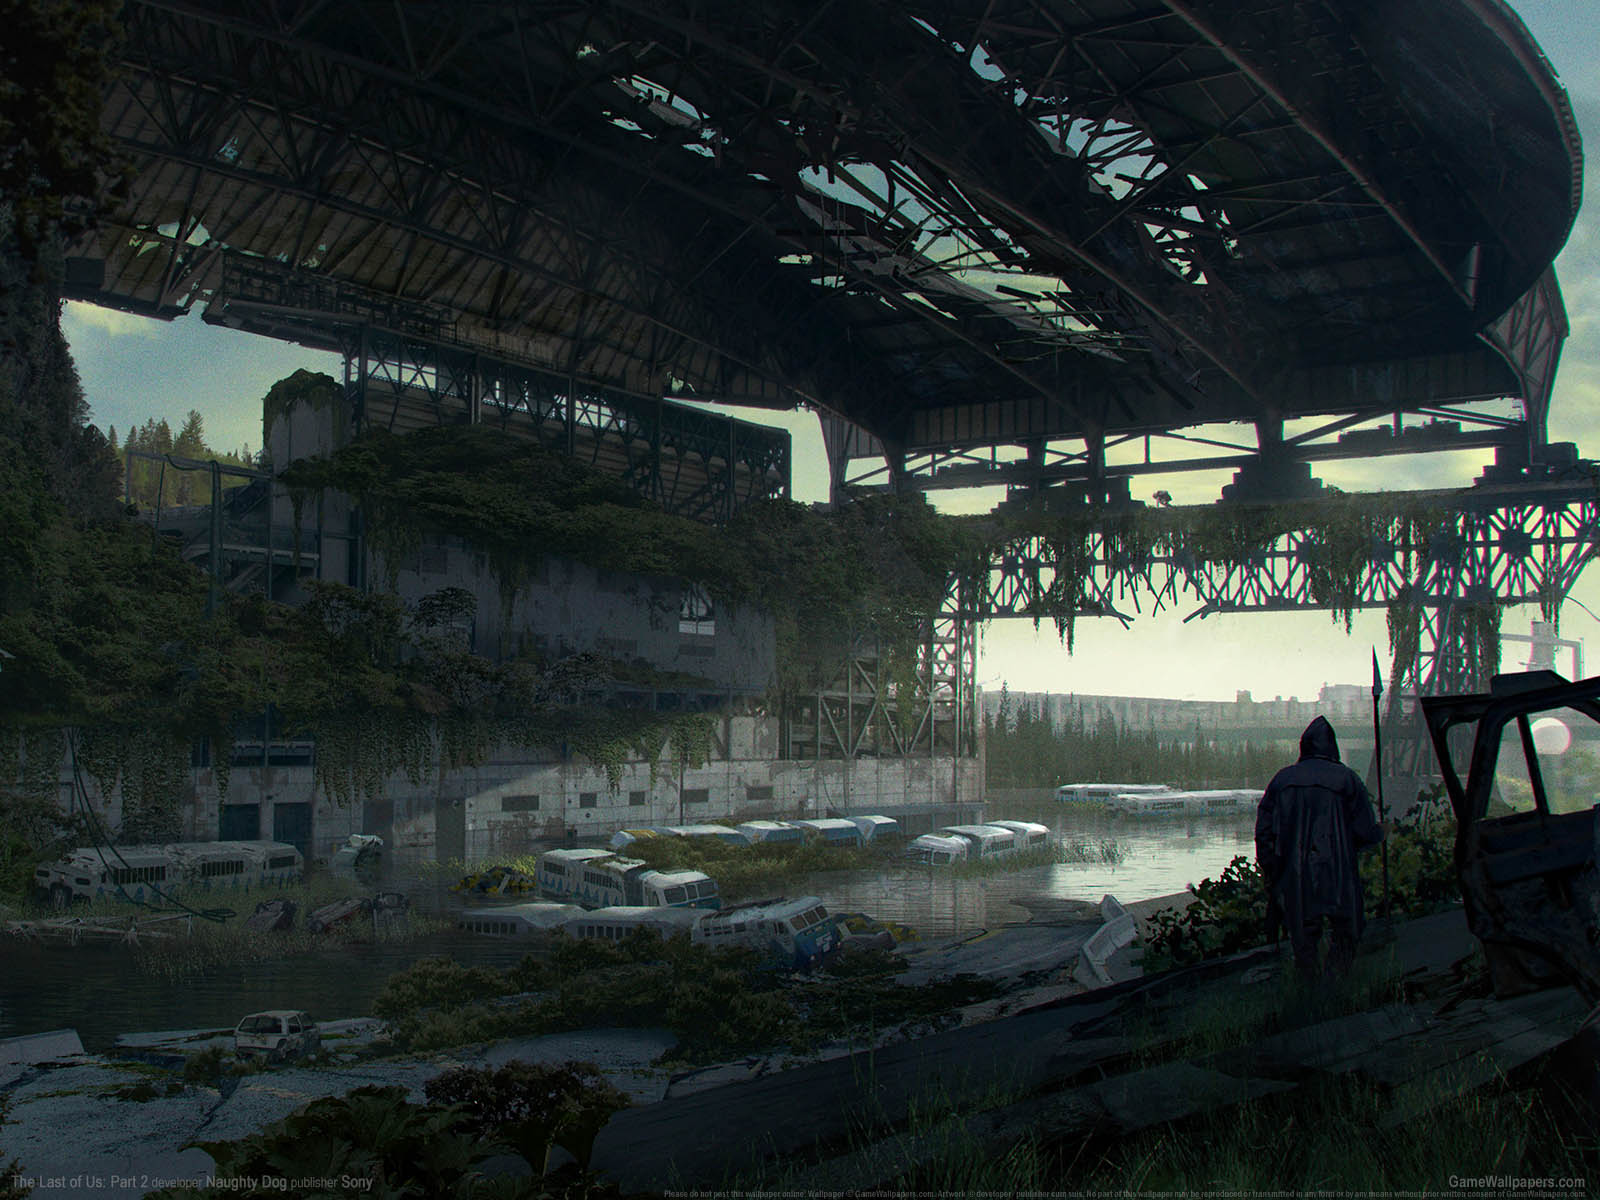 The Last of Us%3A Part 2 achtergrond 10 1600x1200